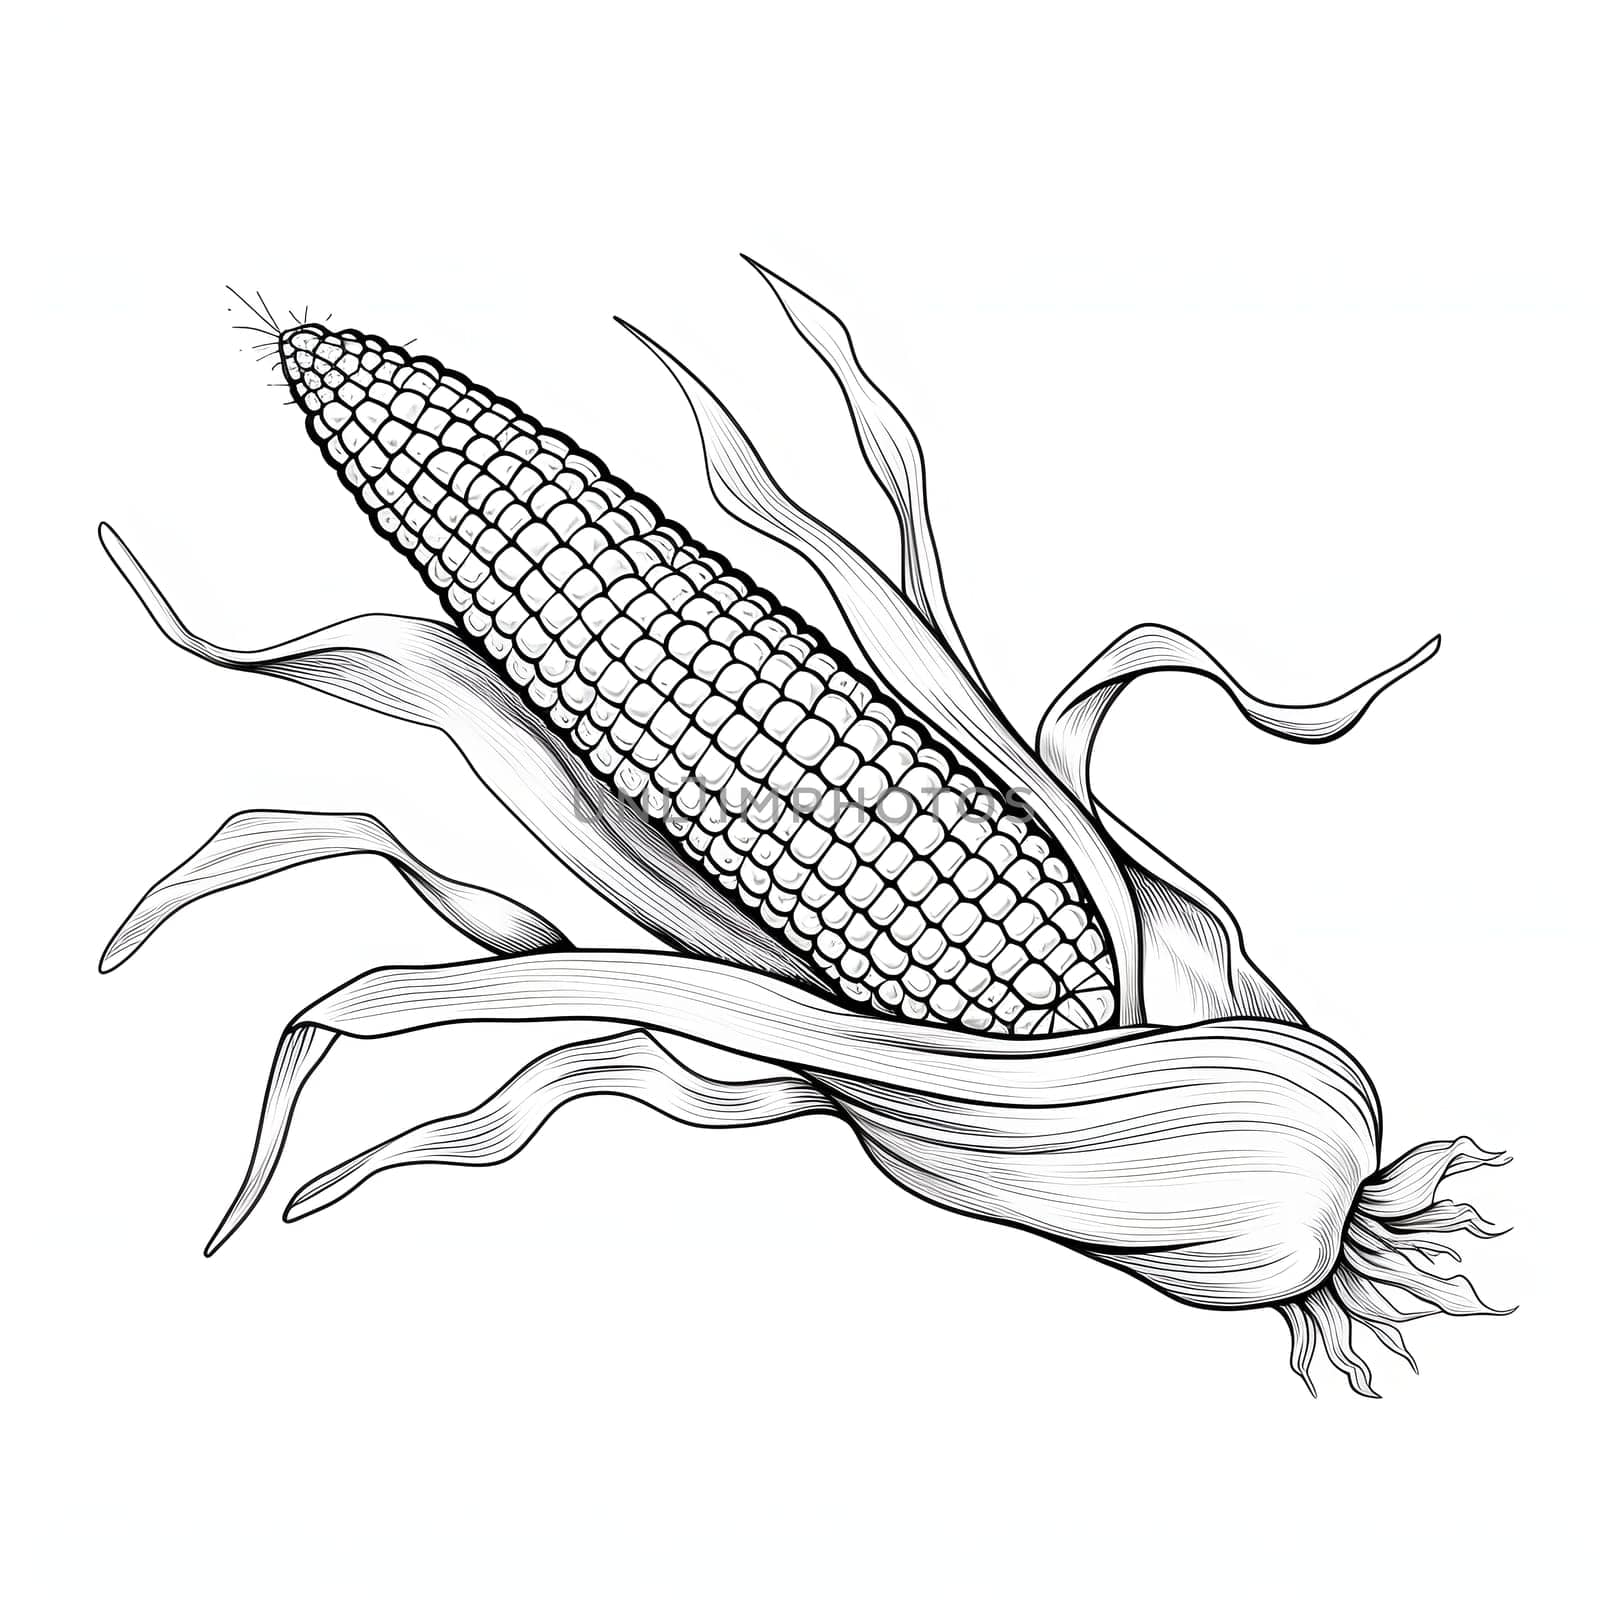 Black and White coloring book corn in a leaf. Corn as a dish of thanksgiving for the harvest, a picture on a white isolated background. An atmosphere of joy and celebration.